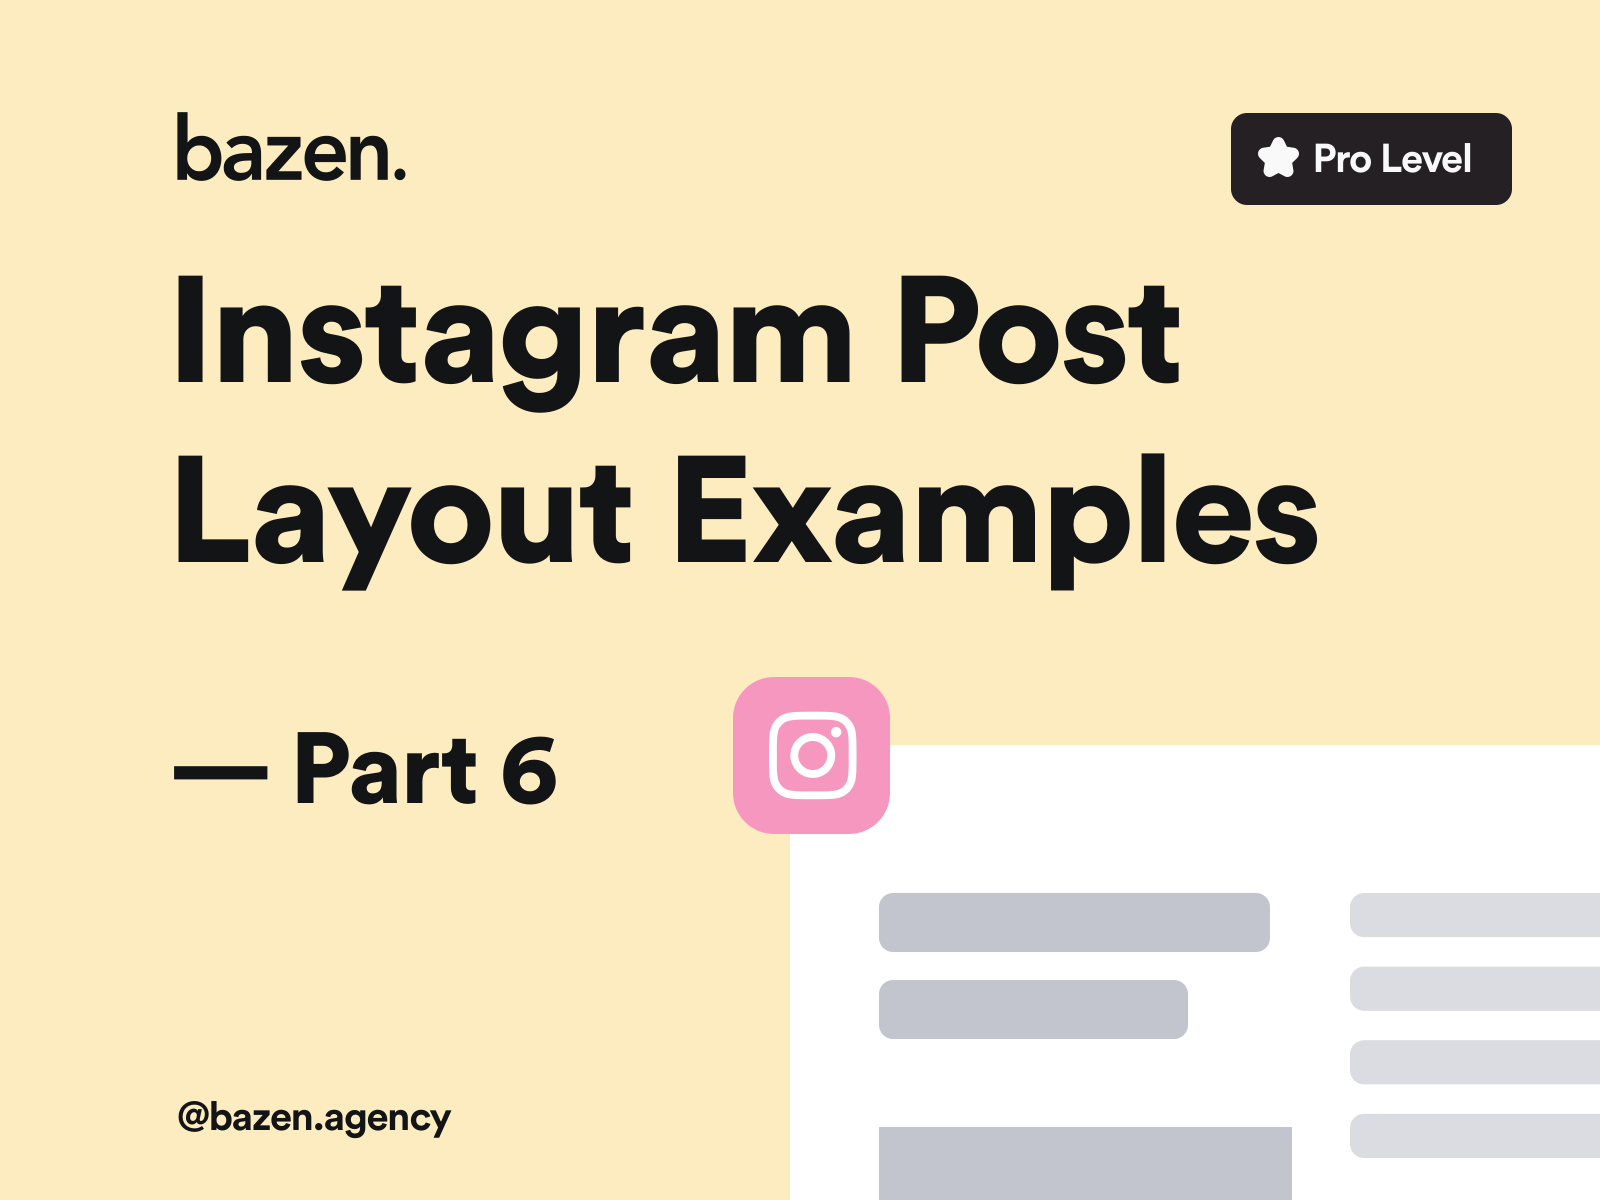 Ui Tip - IG Post Layout Examples - Part 6 by bazen.talks for bazen. on